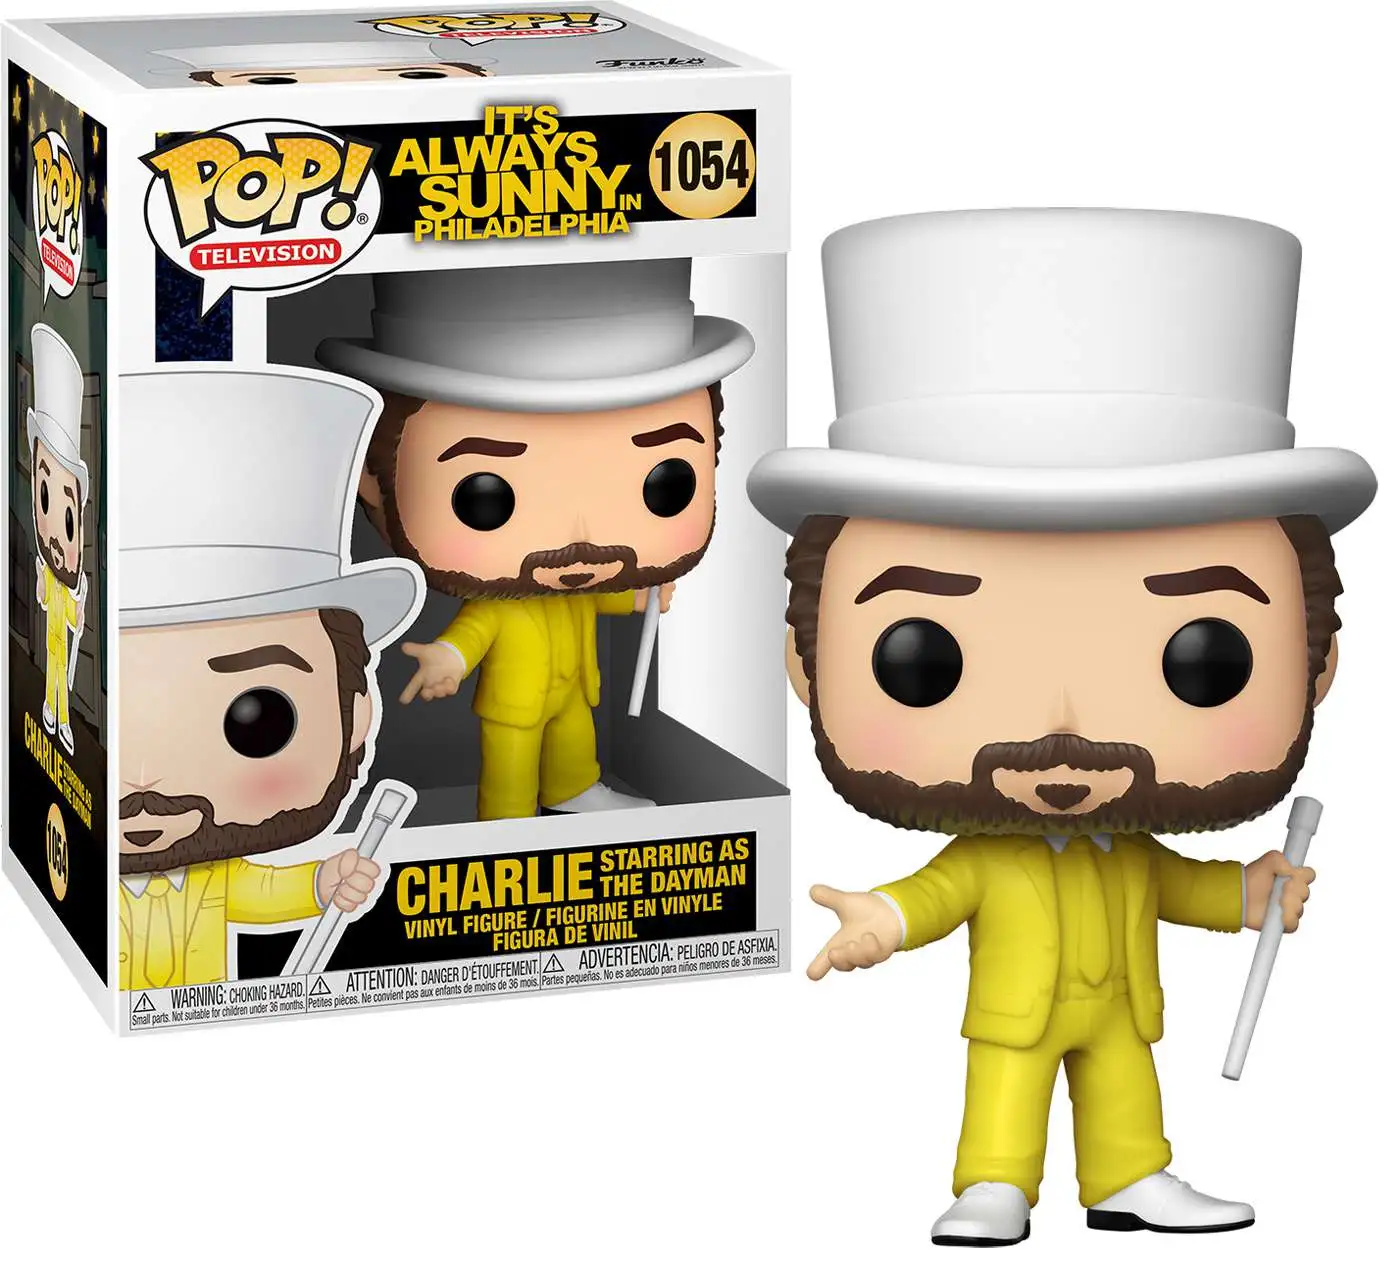 Funko Its Always Sunny In Philadelphia Pop Television Charlie Vinyl Figure 1054 Starring As The 